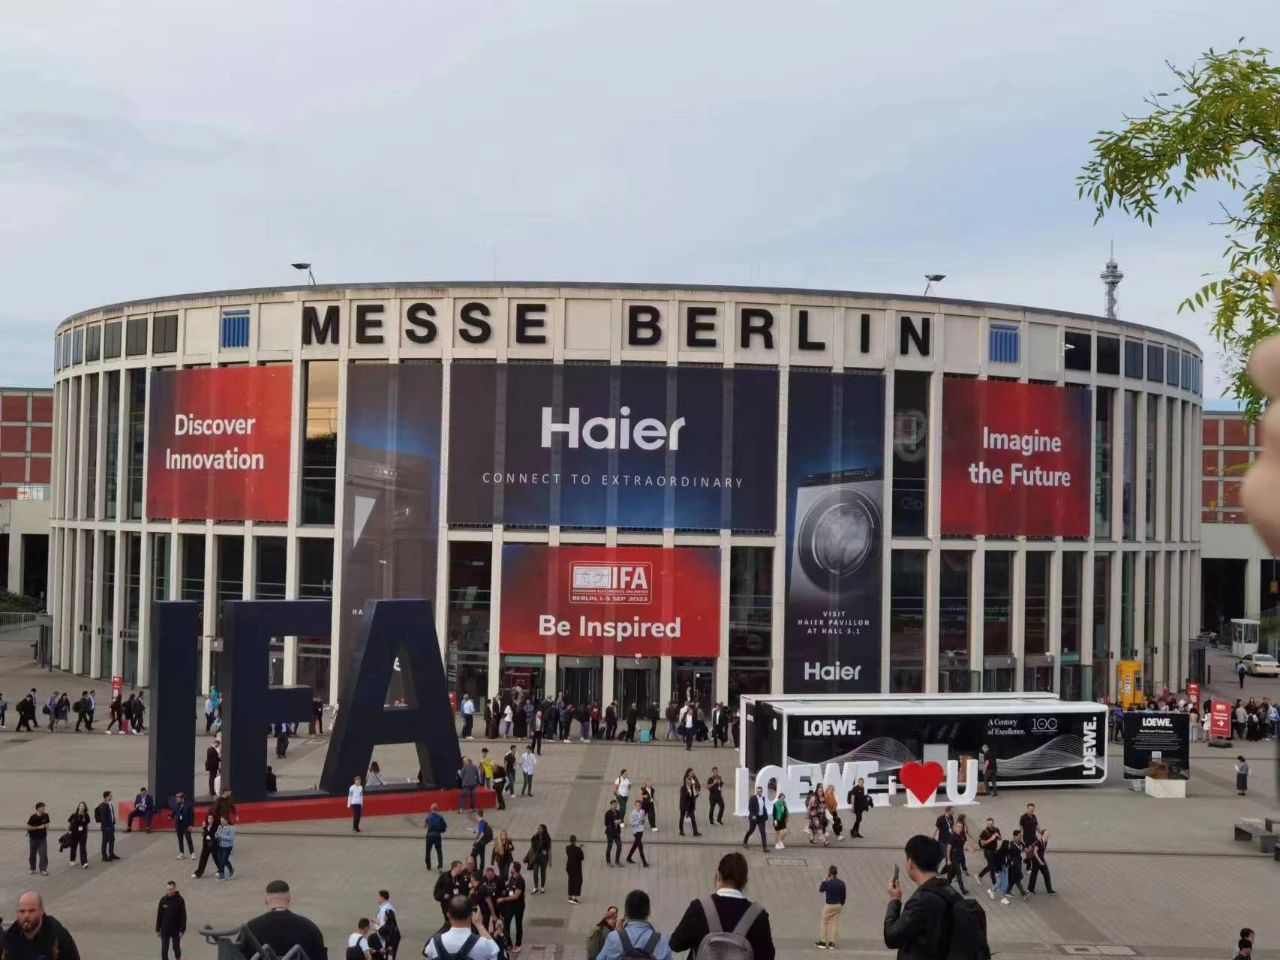 Nanxin Technology Co.,Ltd takes you to the IFA exhibition site in Berlin, Germany